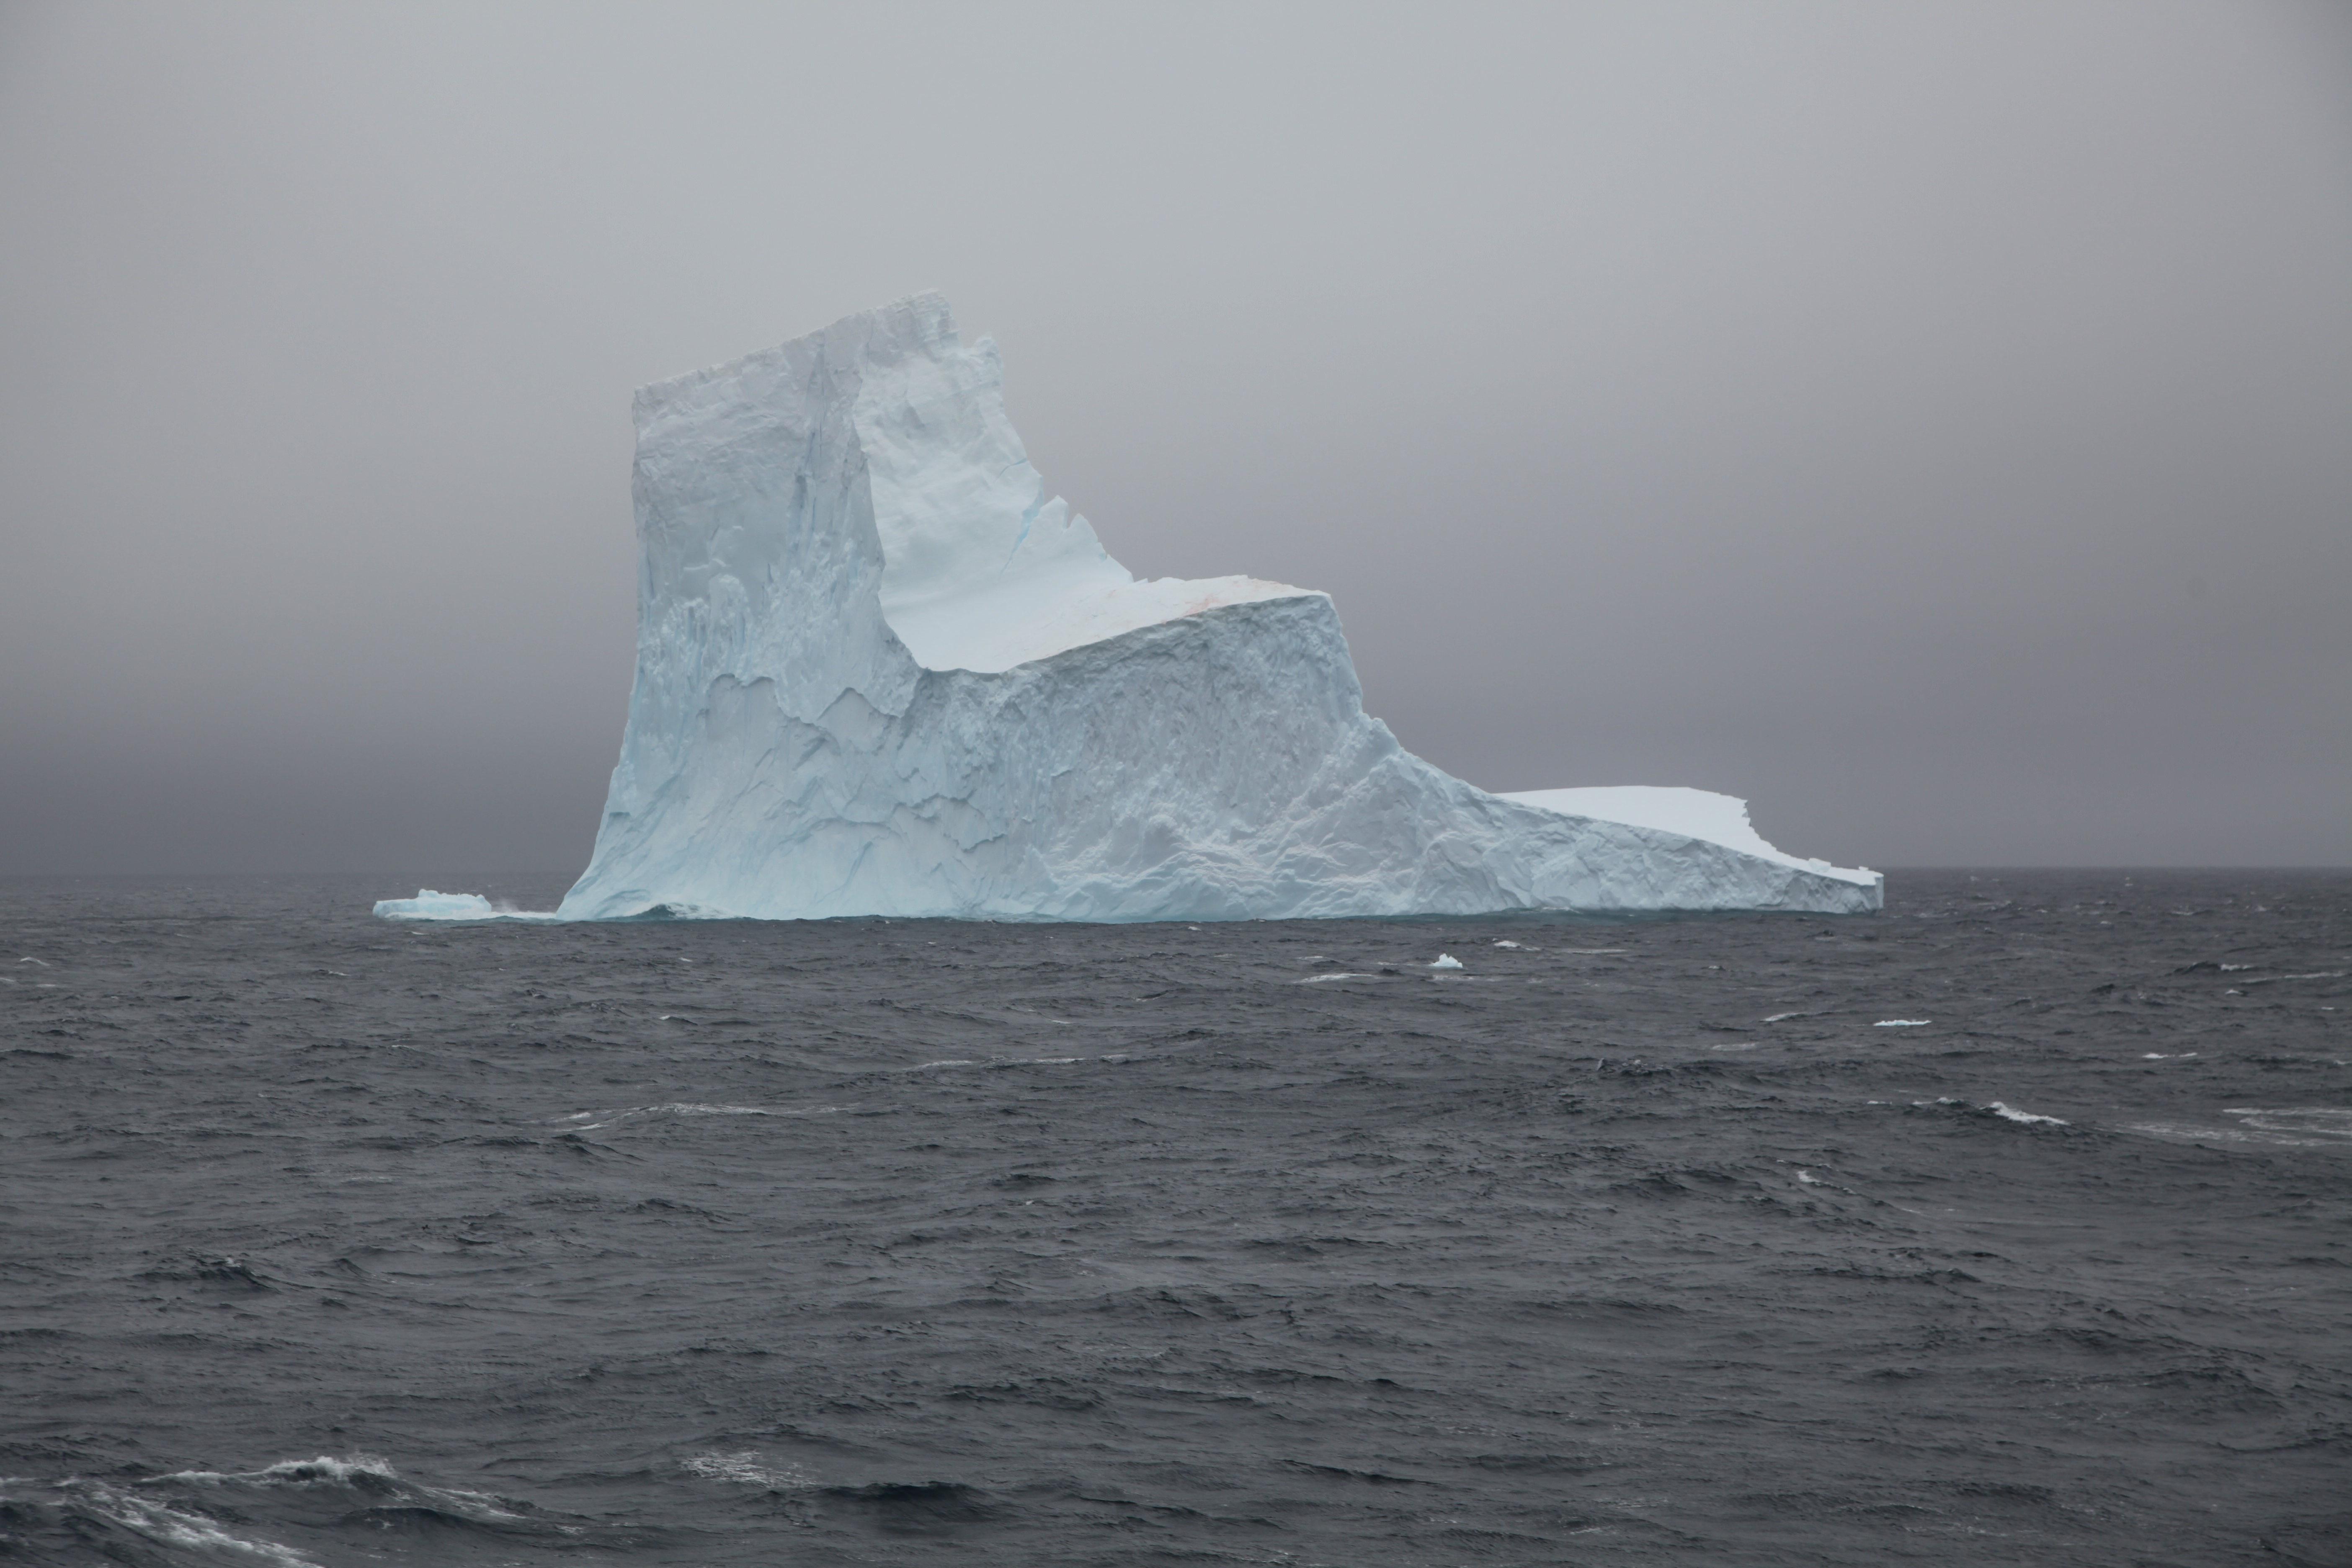 Challenging maritime conditions in the Southern Ocean should make vessel safety a priority. Photo:Liam Quinn/creative commons